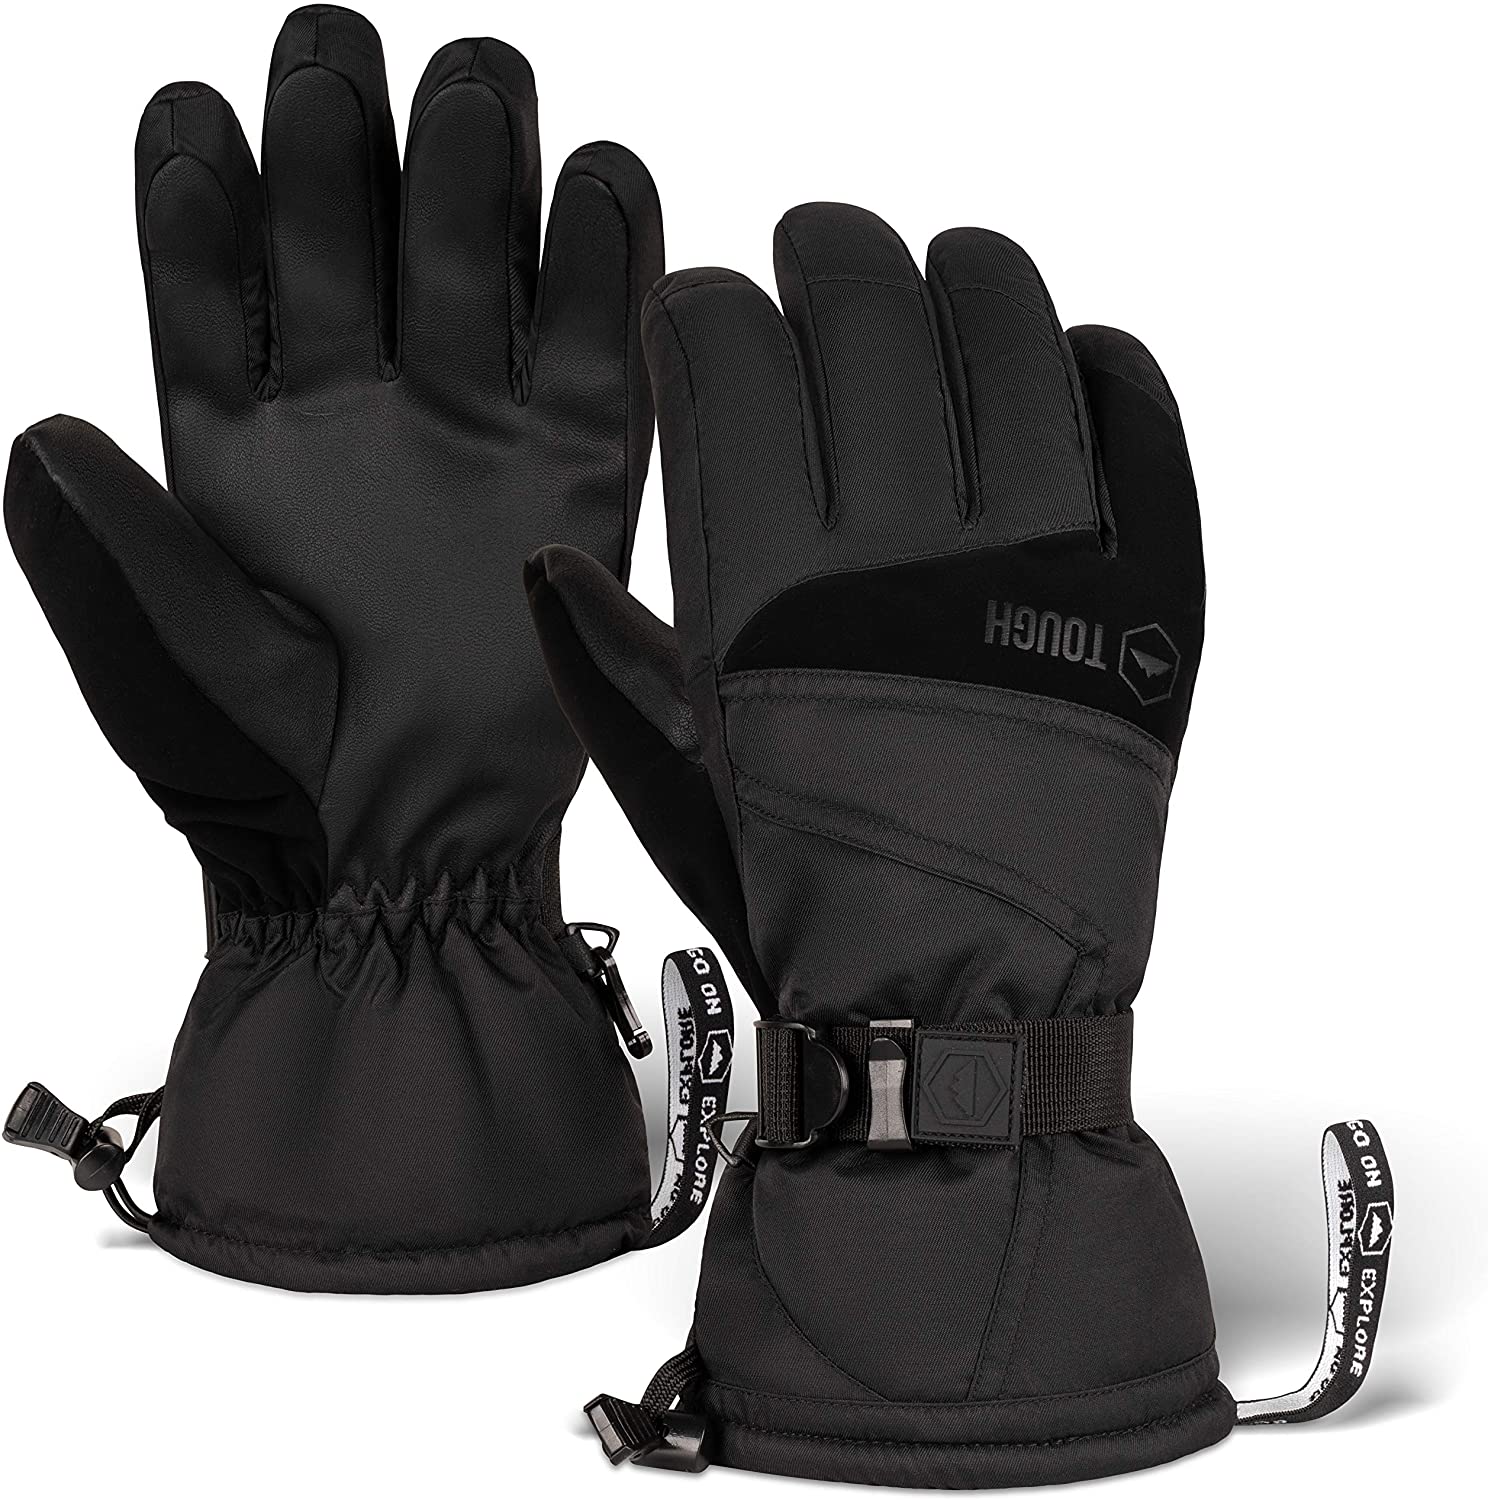 Tough Outdoors Thermal Insulation Waterproof & Windproof Nylon Shell Ski Gloves